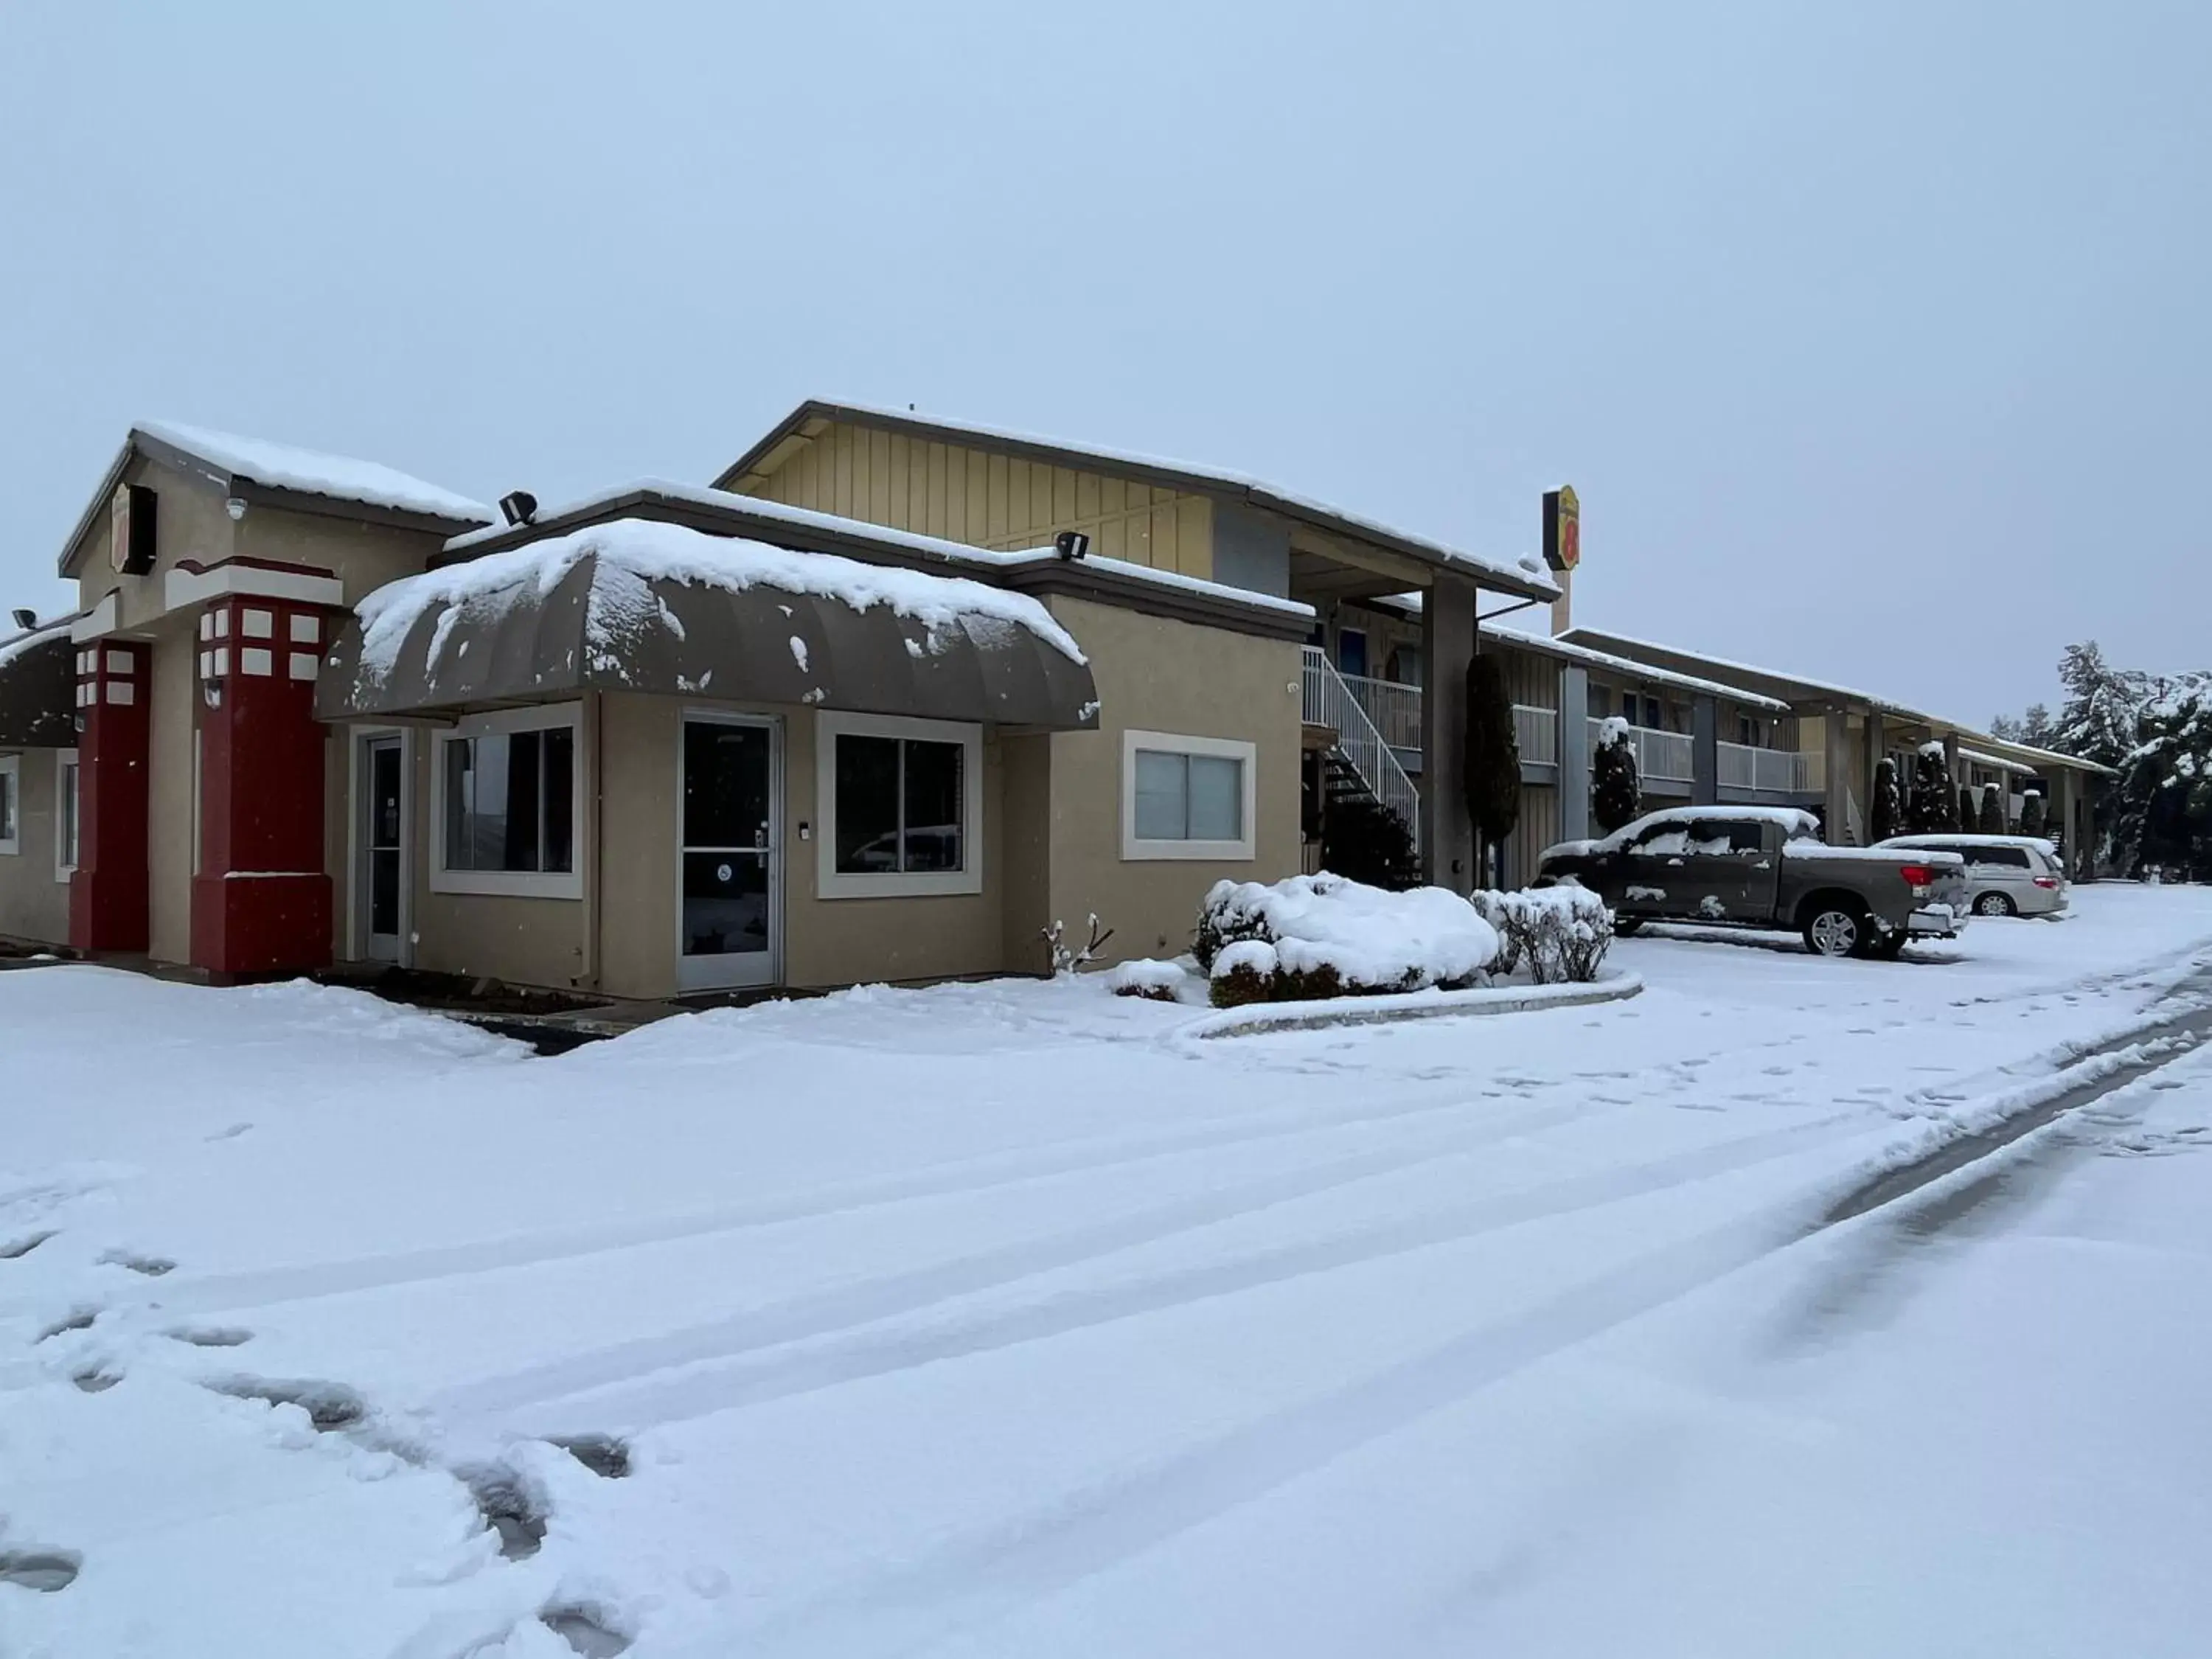 Property building, Winter in Super 8 by Wyndham Red Bluff